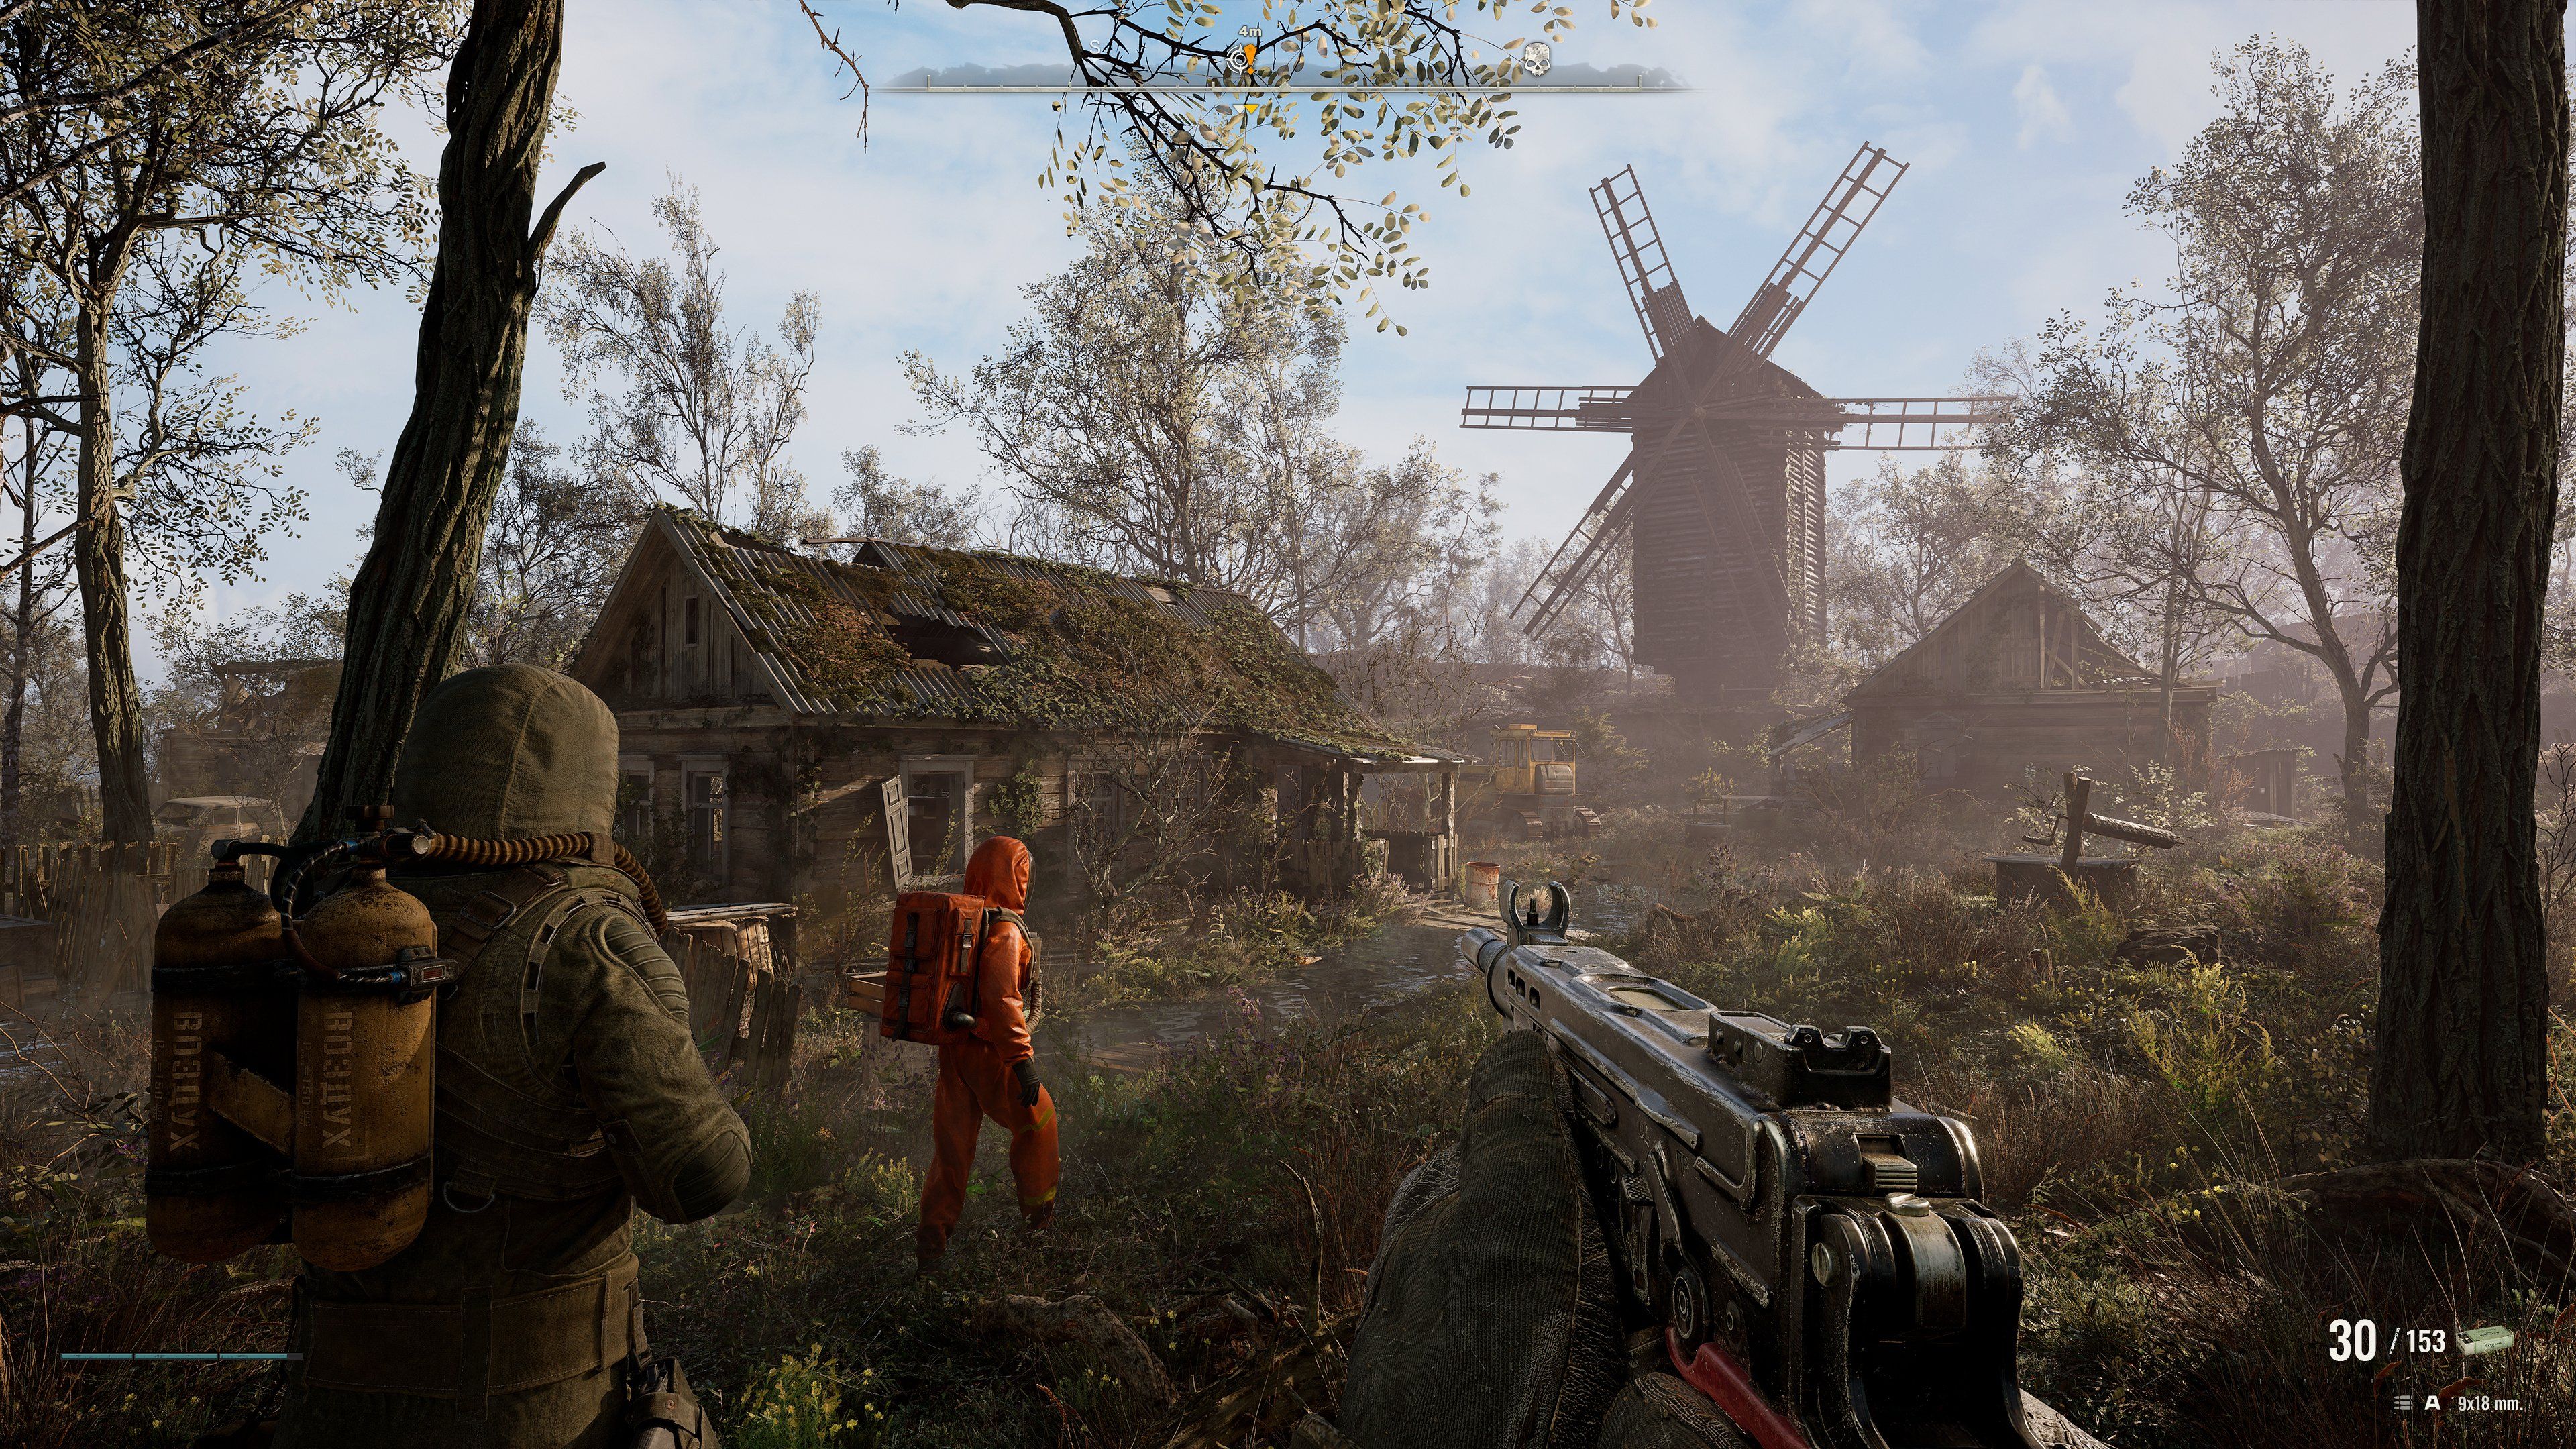 stalker 2 windmill and radiation suits